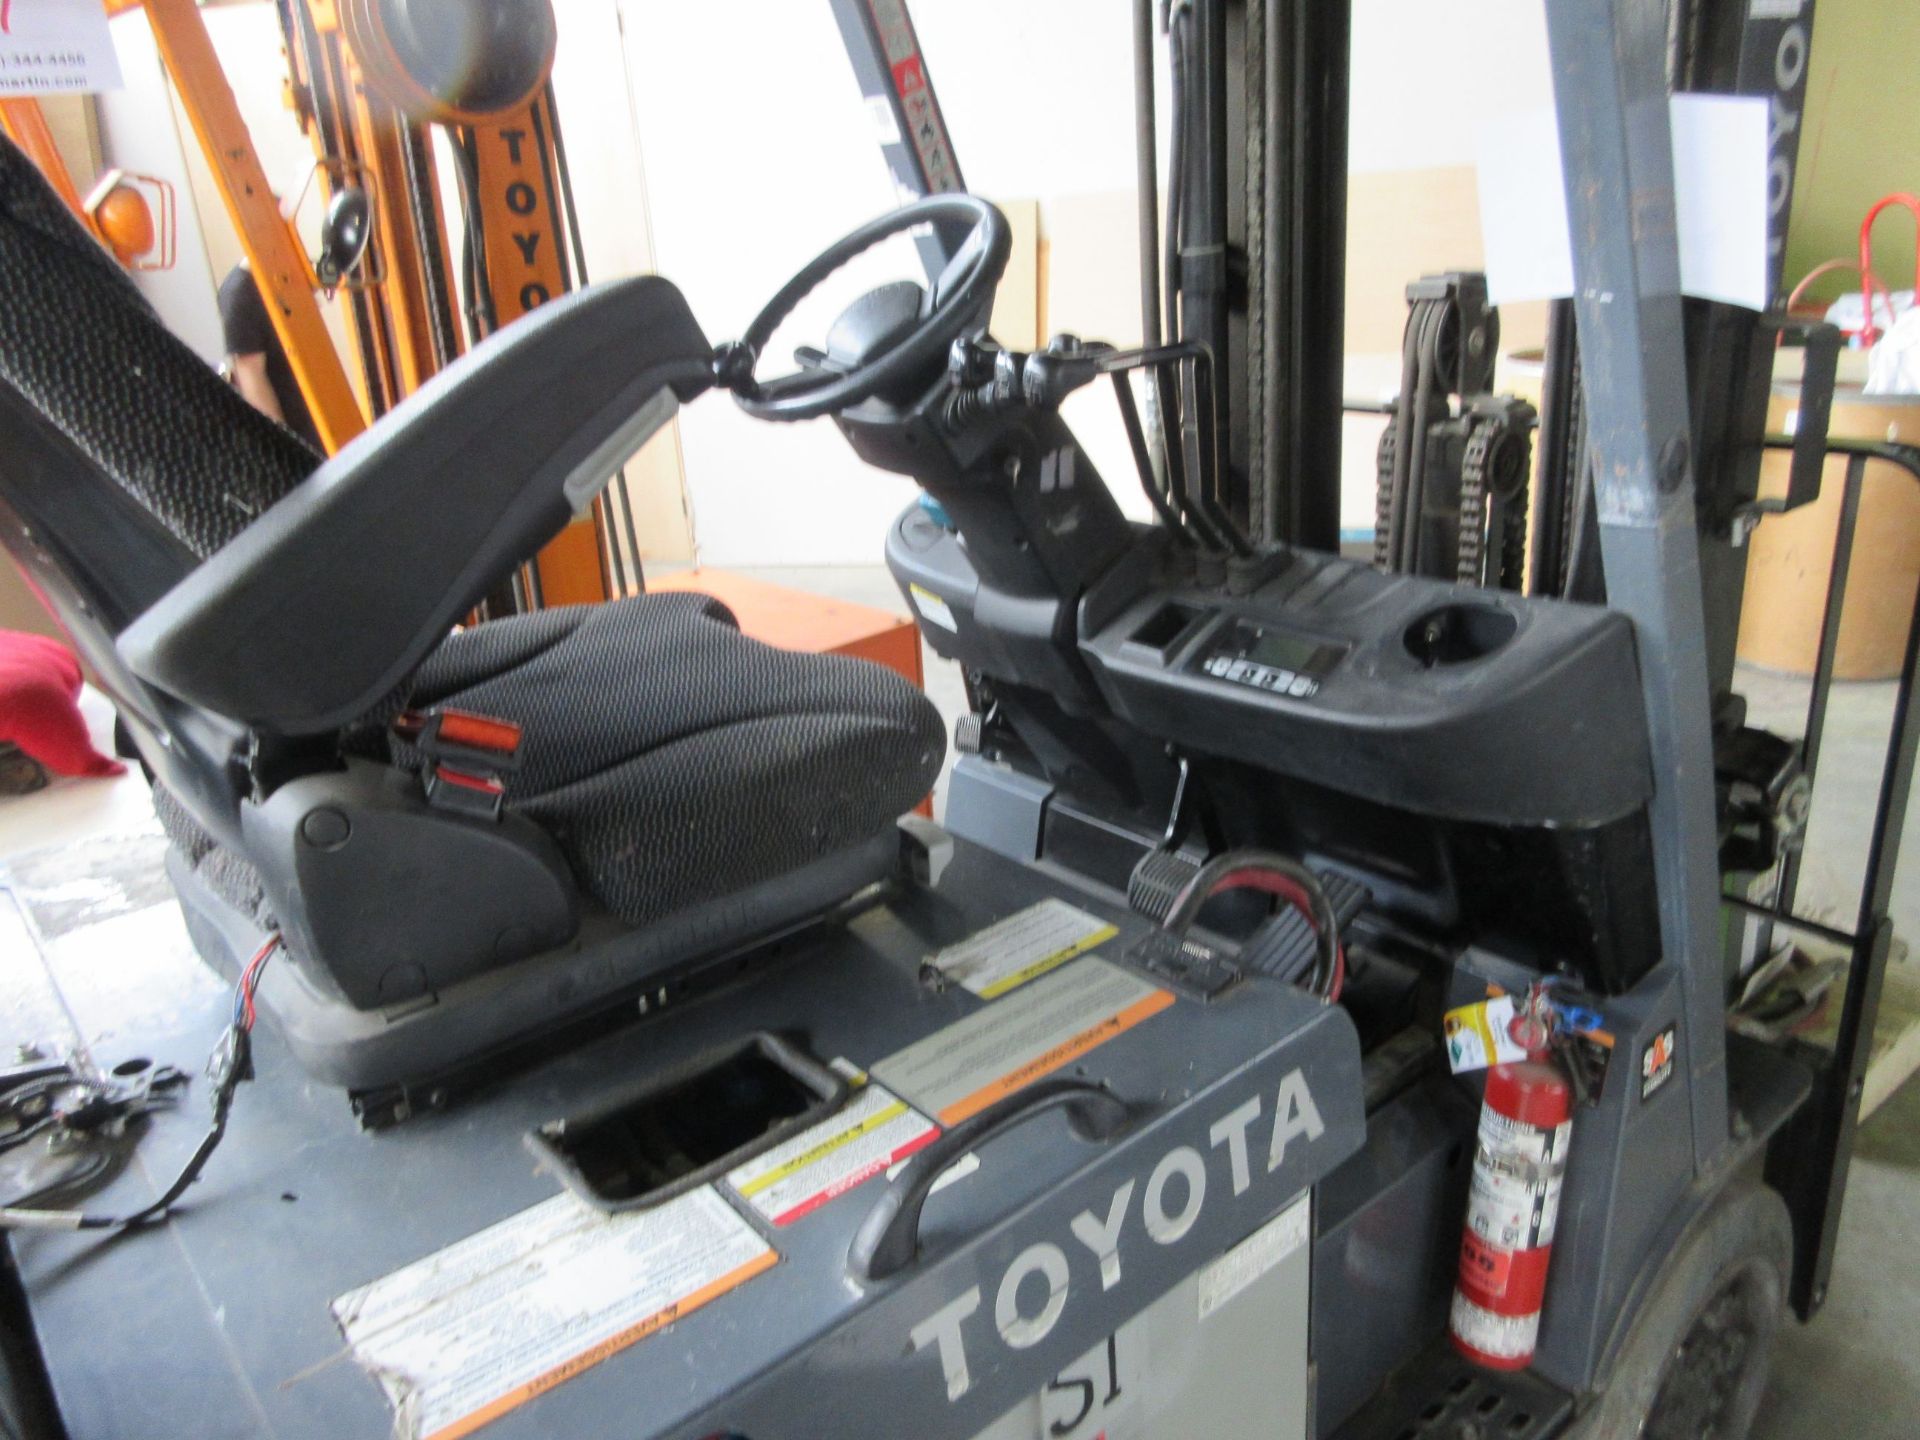 TOYOTA electric forklift Mod: 8FBCV25, 3 sections, 4400 LB capacity, 48V c/w opportunity charger, - Image 7 of 11